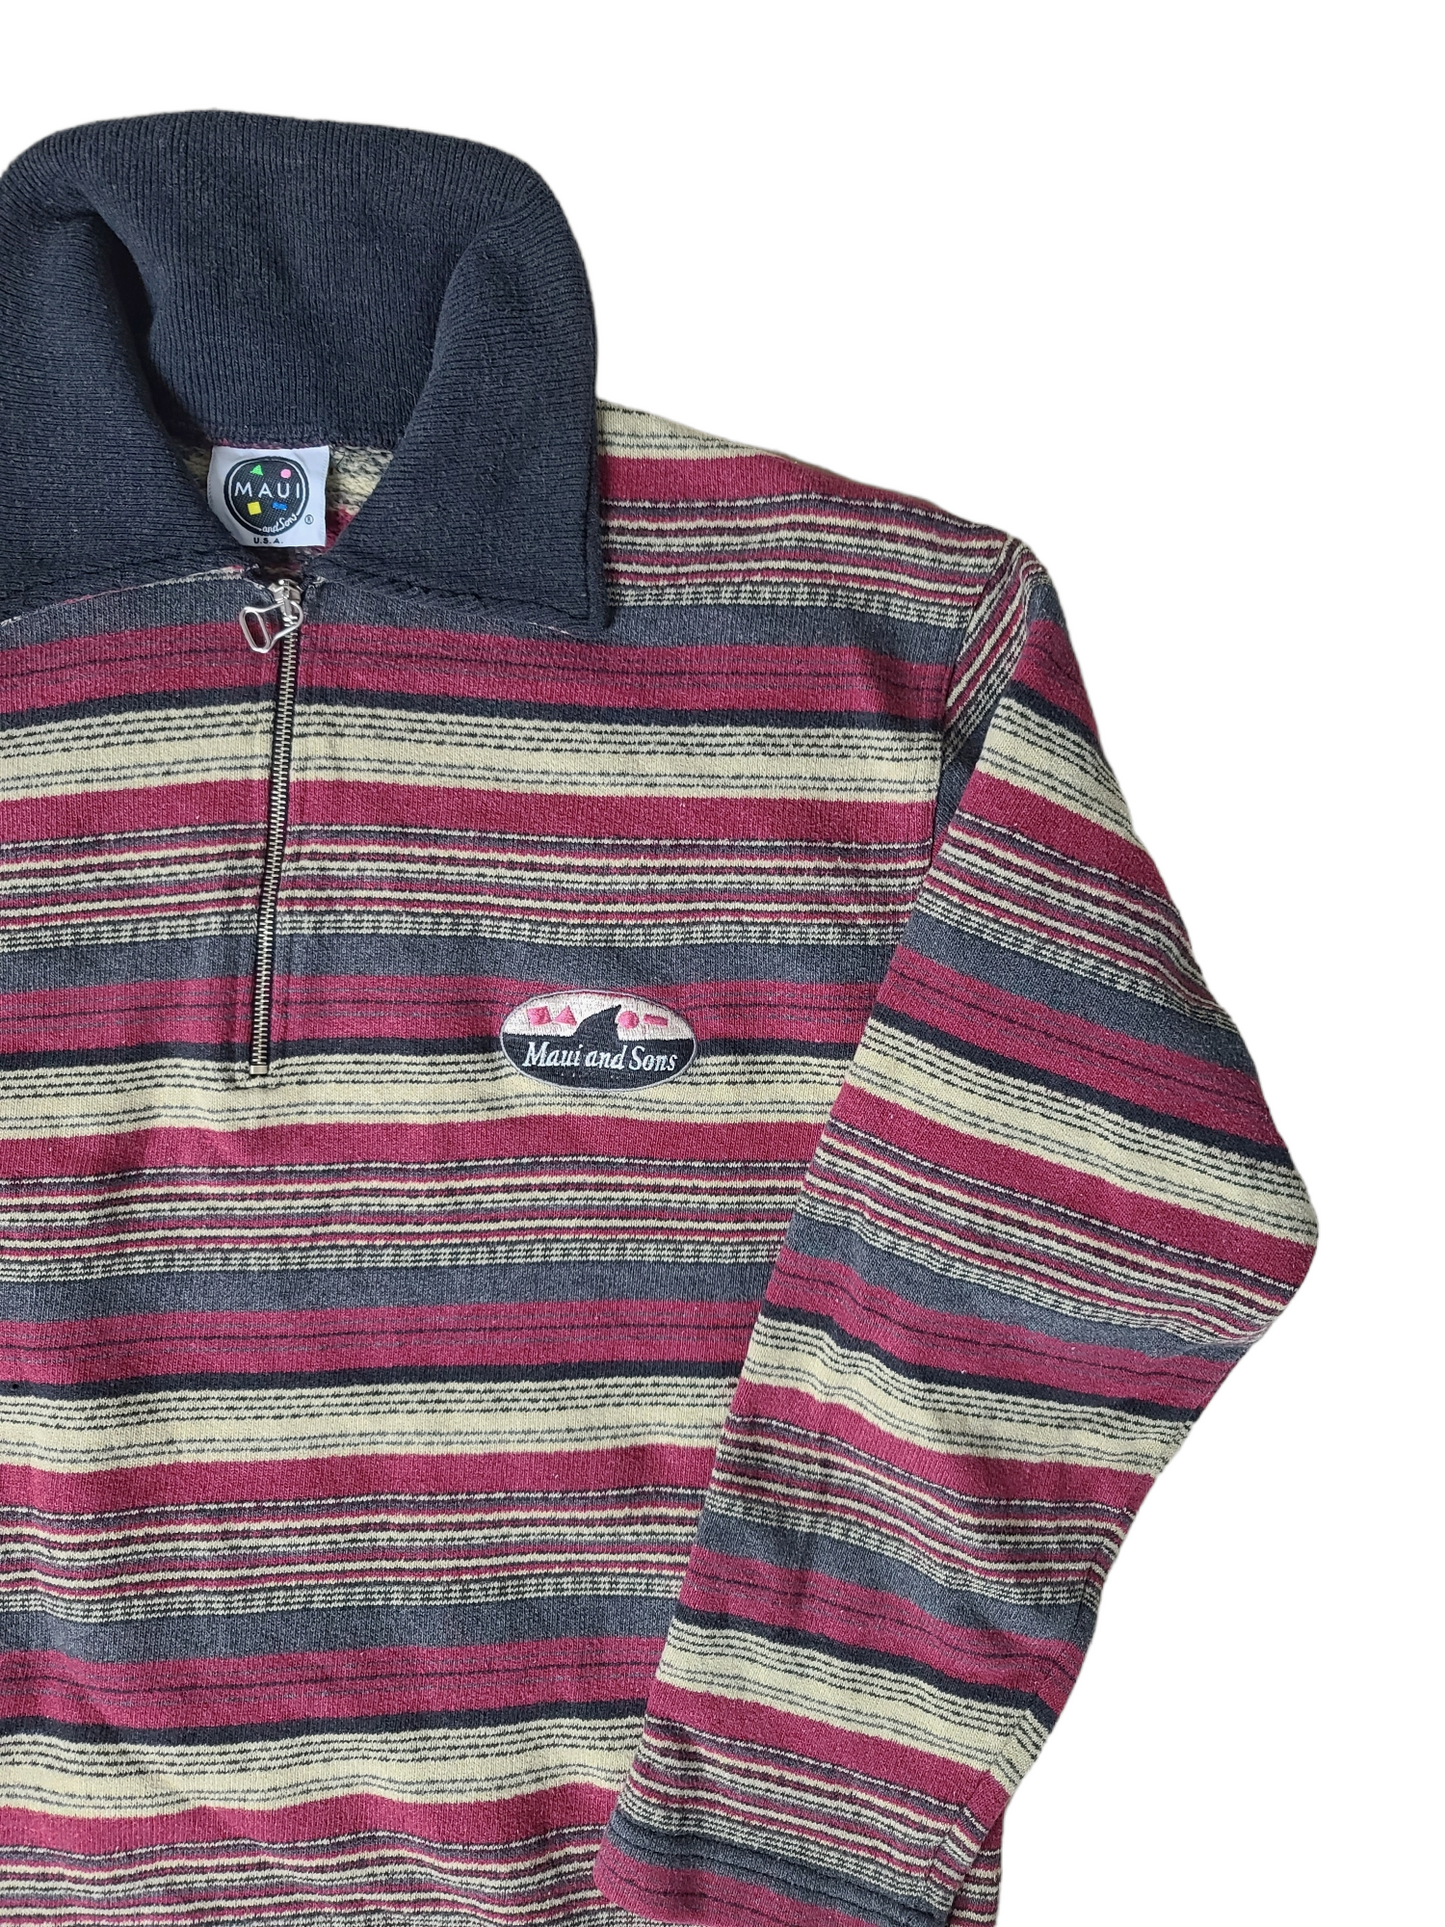 Pull 90s sportwear Maui and Sons